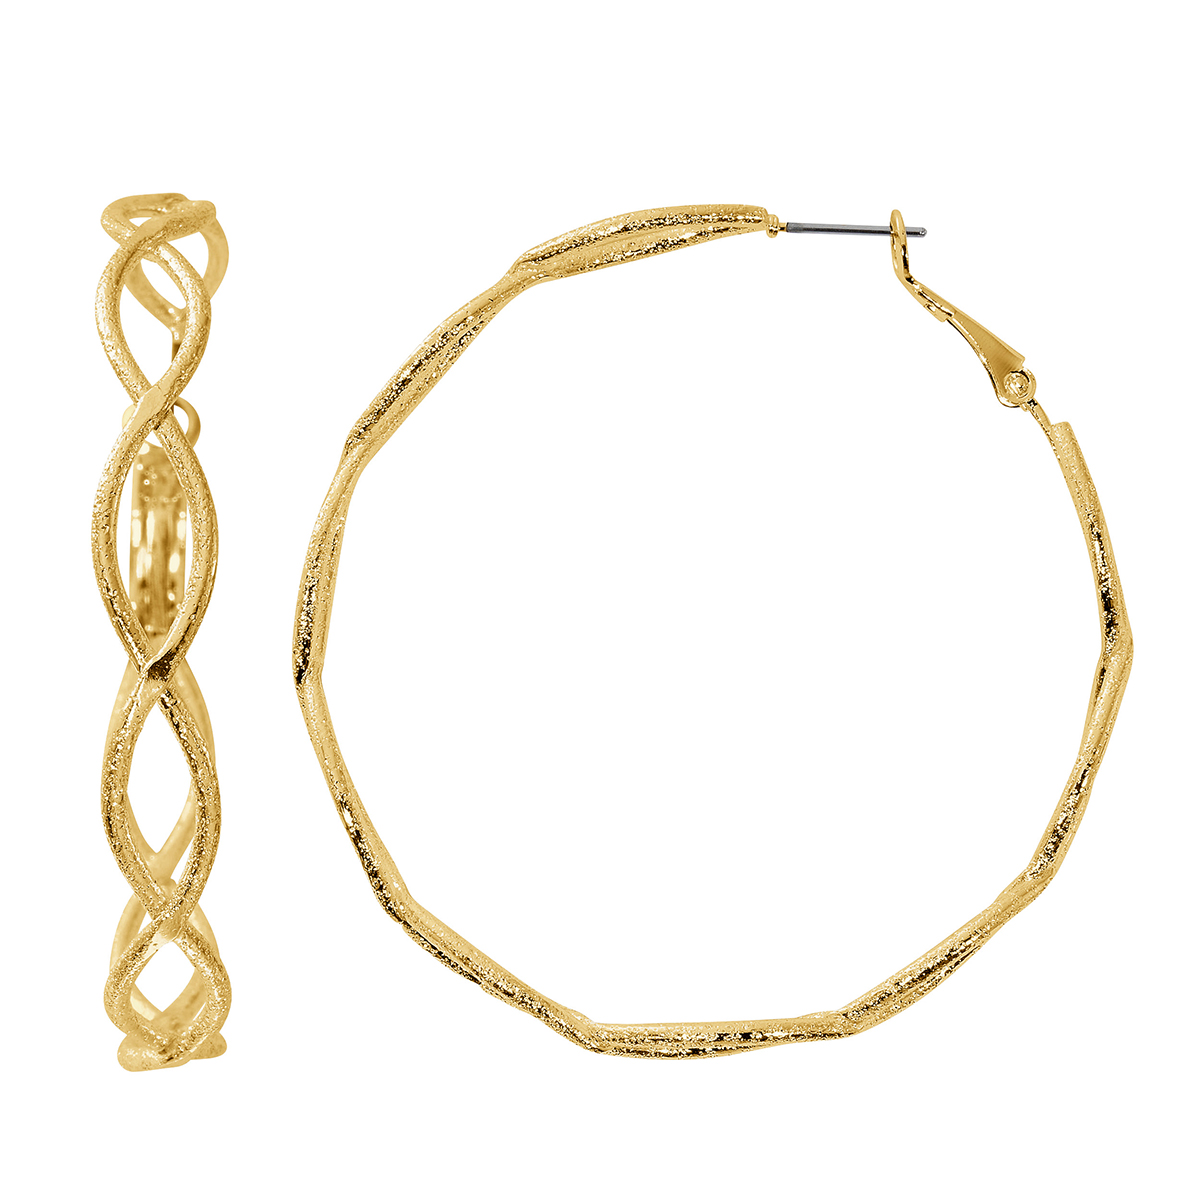 Design Collection Gold-Tone Braided Design Hoop Earrings